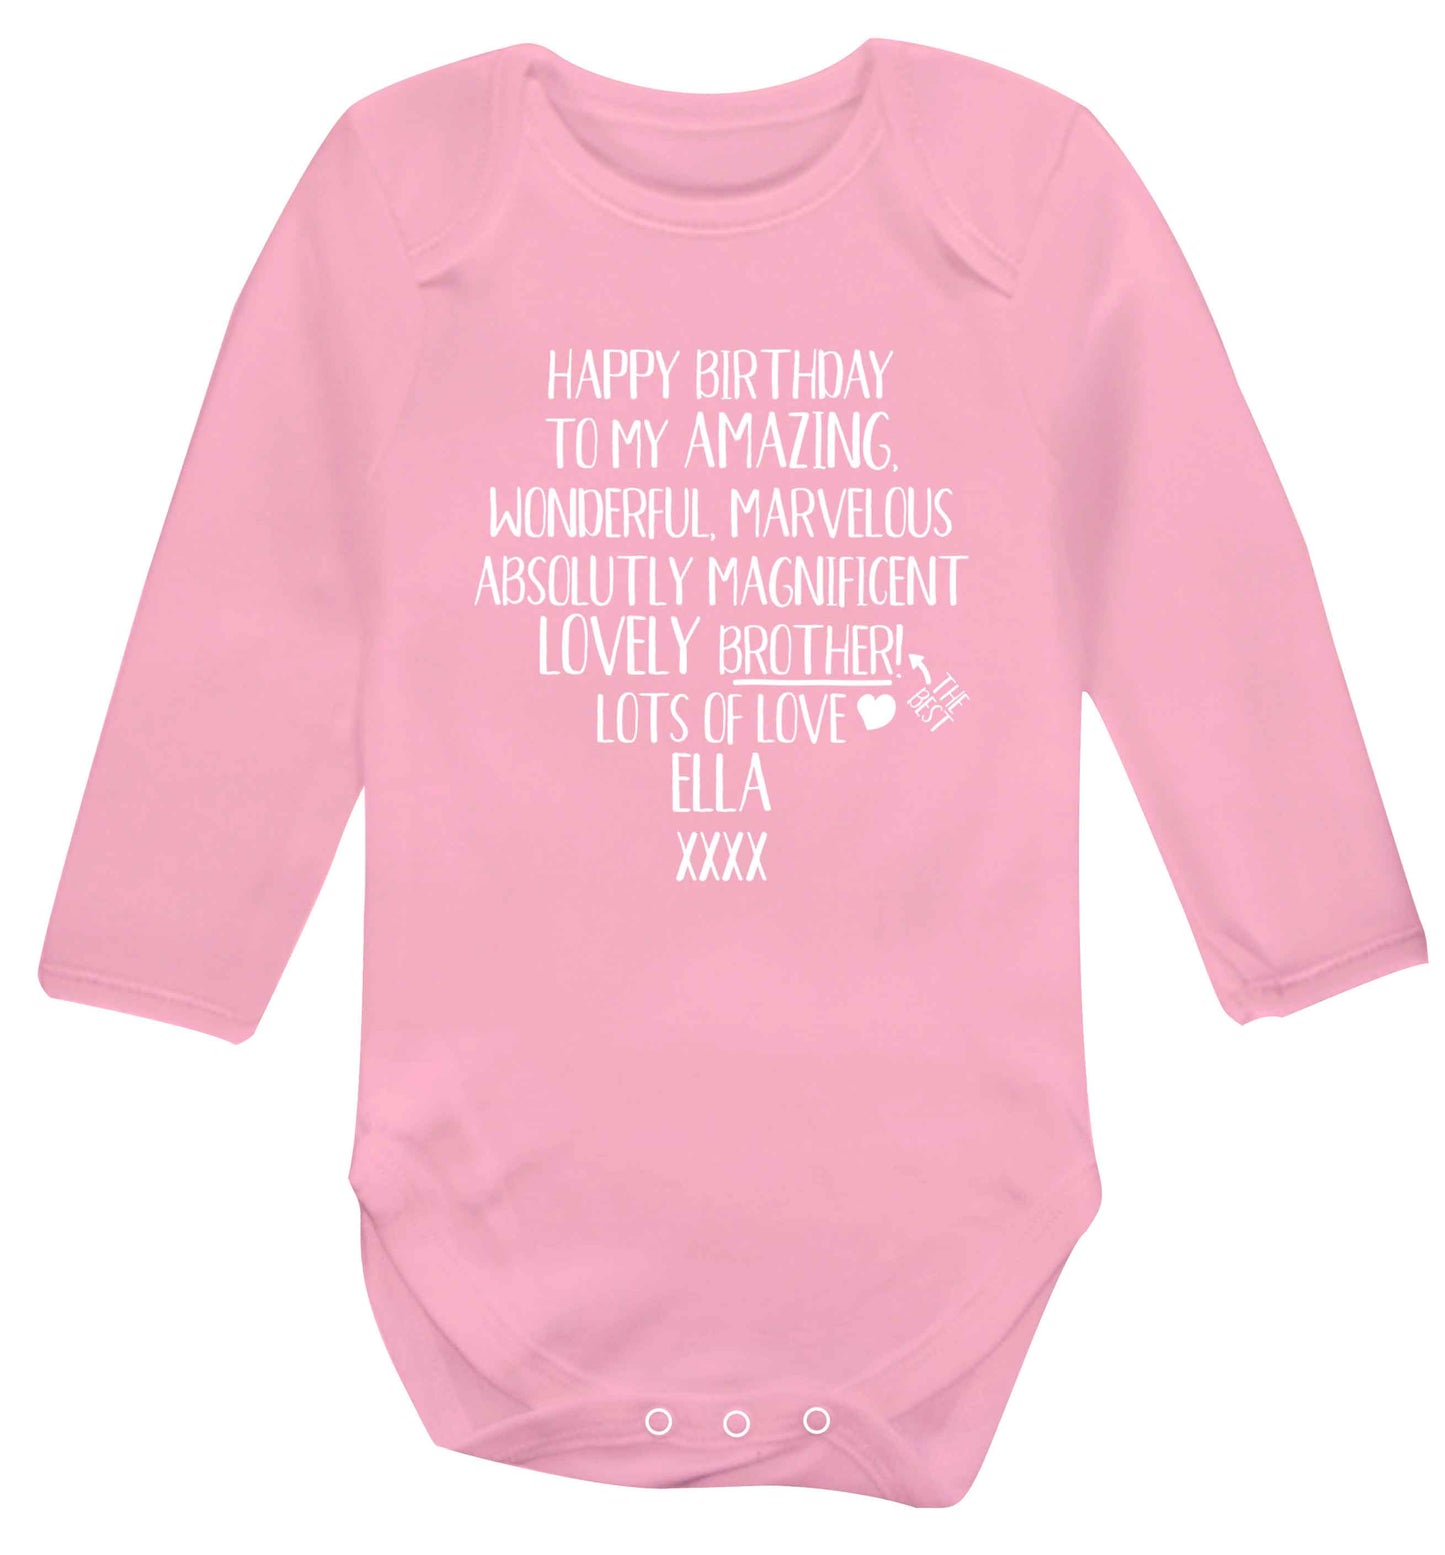 Personalised happy birthday to my amazing, wonderful, lovely brother Baby Vest long sleeved pale pink 6-12 months